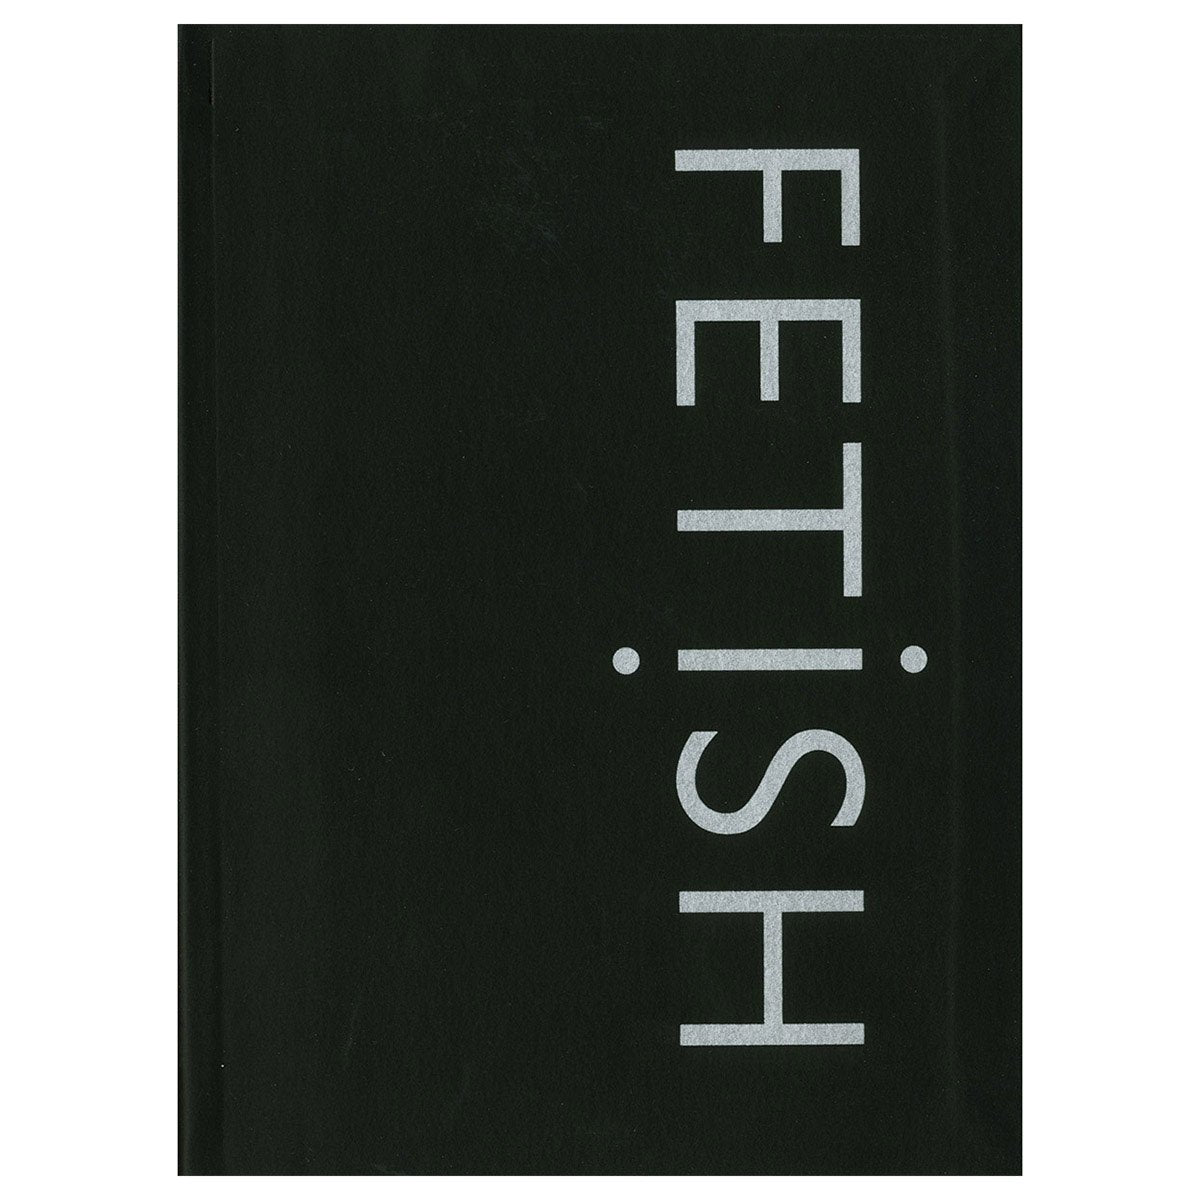 Fetish - Comprehensive Guide to Outrageous Erotic Pleasures - Books and Games